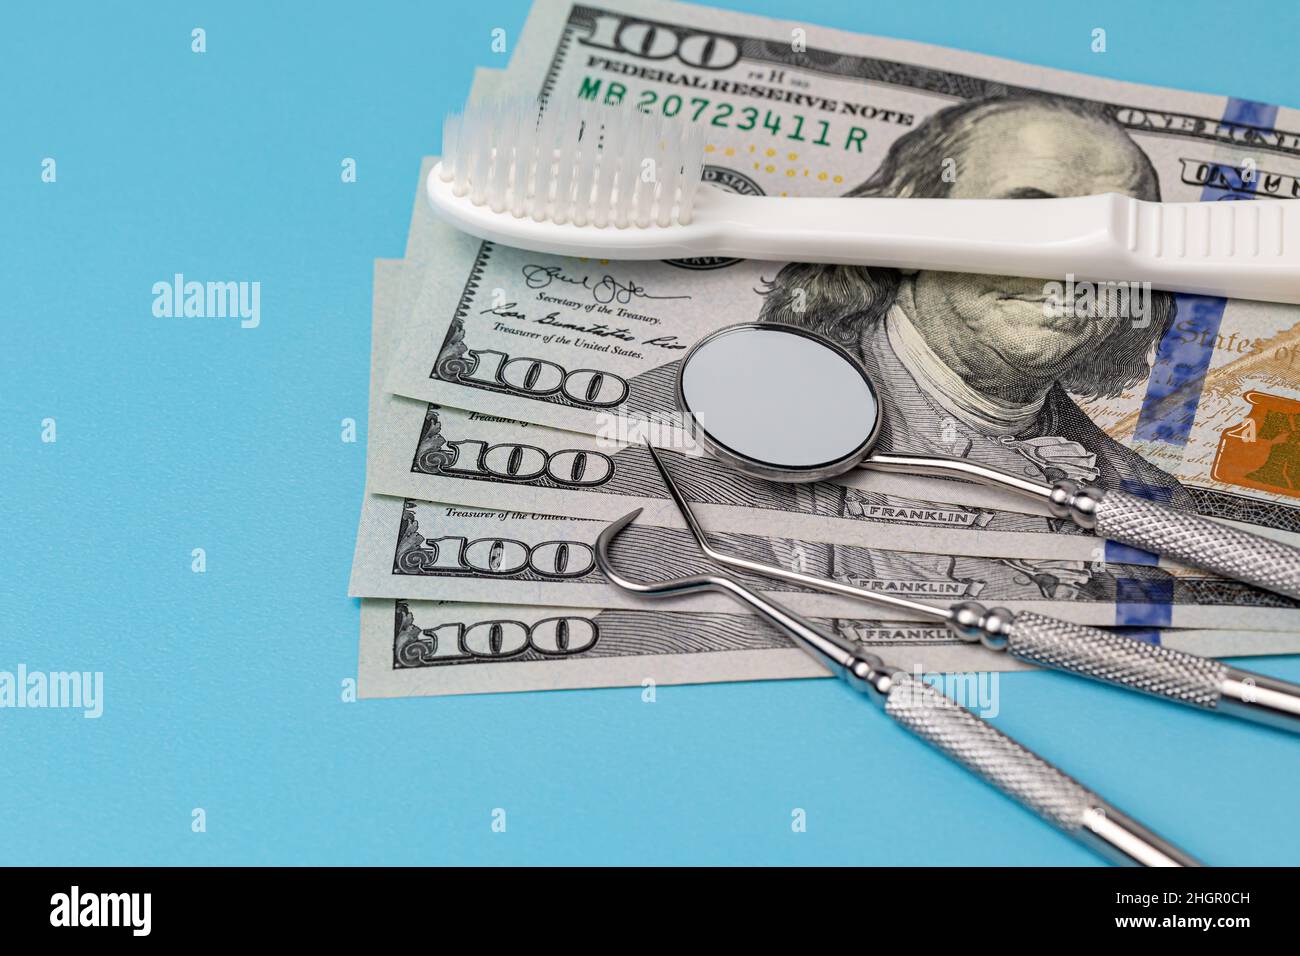 Dental cleaning tools with toothbrush and cash money. Oral health, exam and teeth cleaning concept. Stock Photo